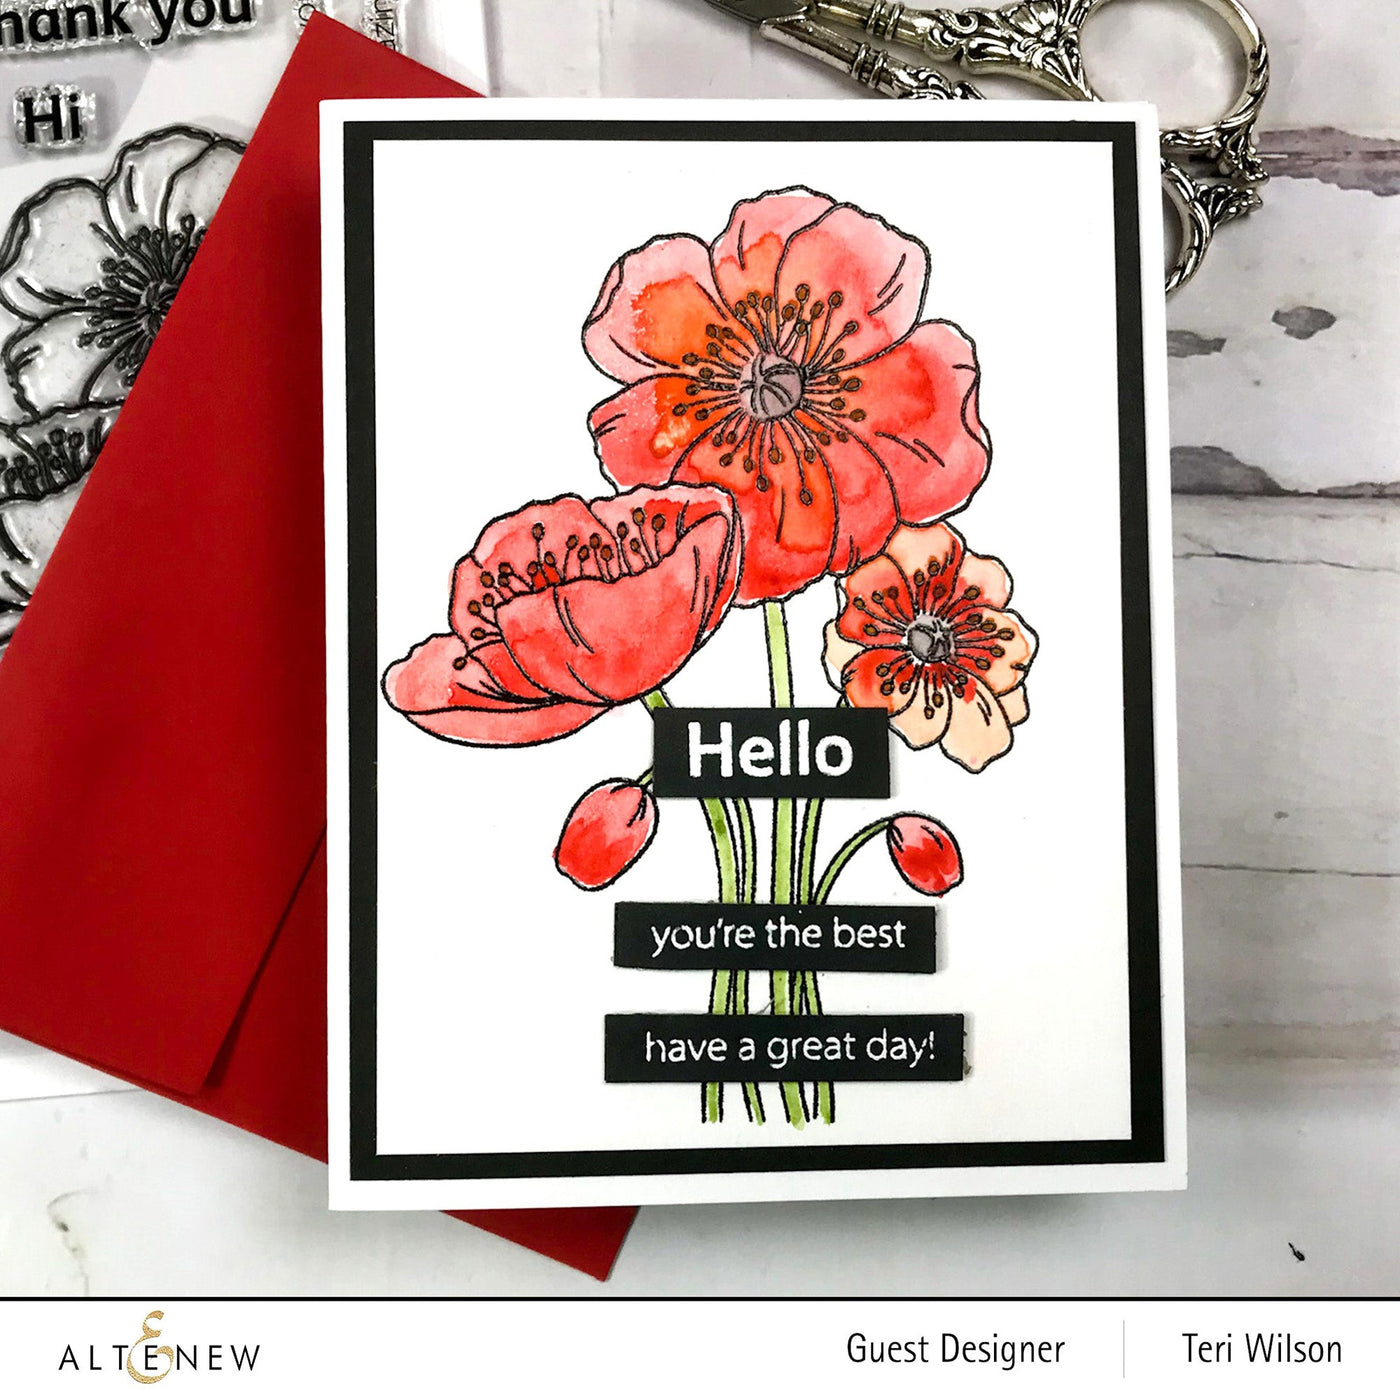 Clear Stamps Paint-A-Flower: Iceland Poppies Outline Stamp Set